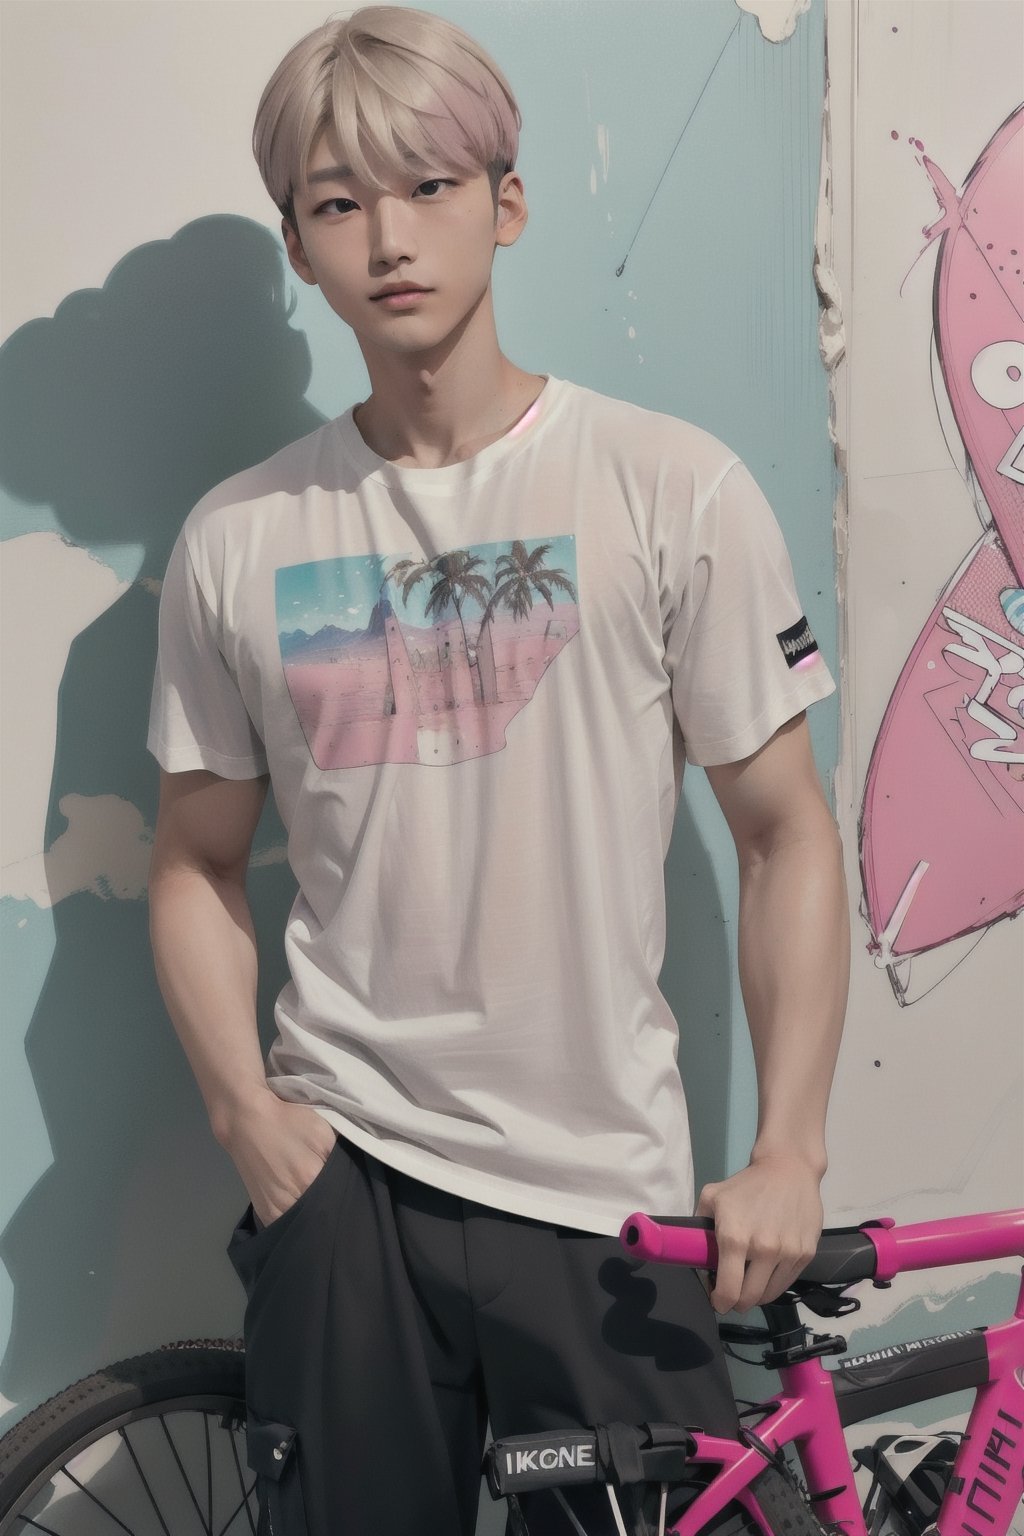 pastel colors, handsome asian boy with a design art printed white t-shirt and a brown half cargo pants, intricate detail, random hairstyle with pink blond, a surf board with vivid colors and a bicycle on white wall, a stylish room of boy,ikemen, handsome asian male, kpop